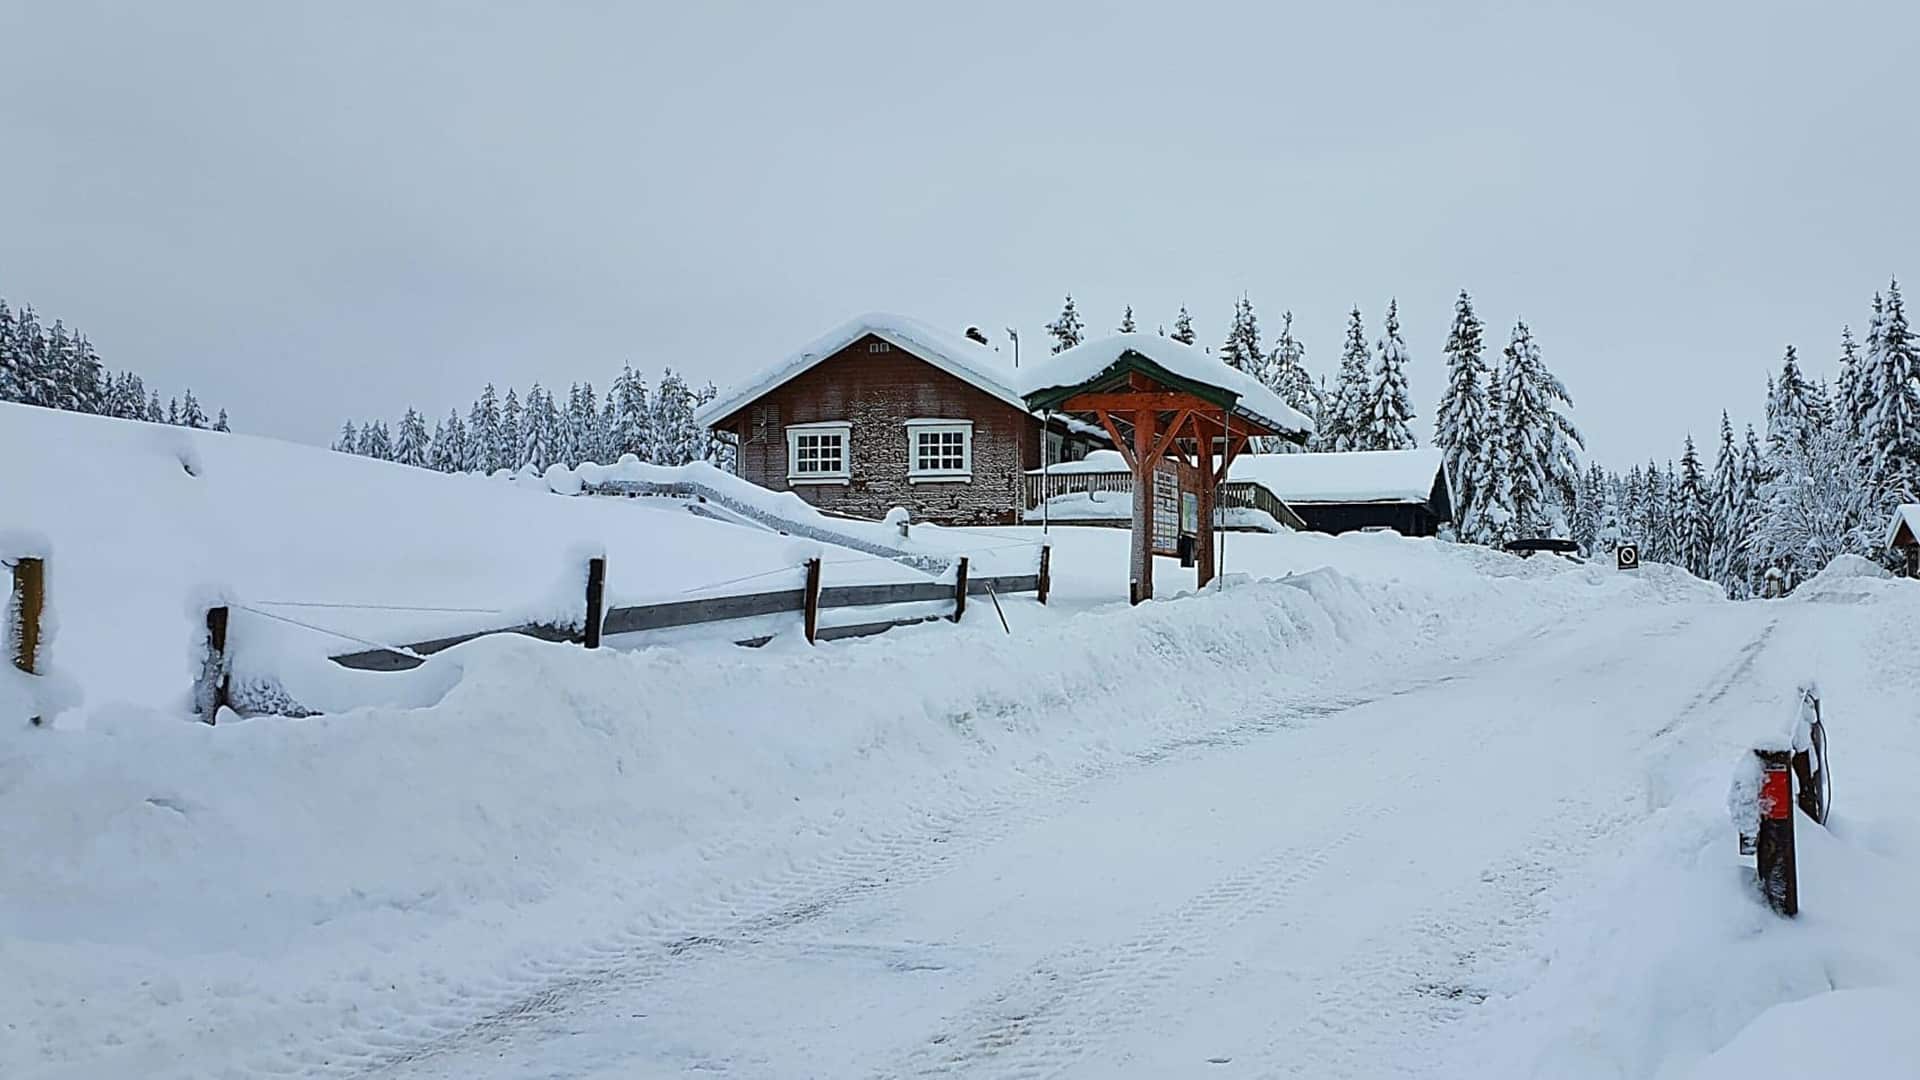 Wooden buildings of Pruterud ski resort is covered in snow and ice on a cold winter day.